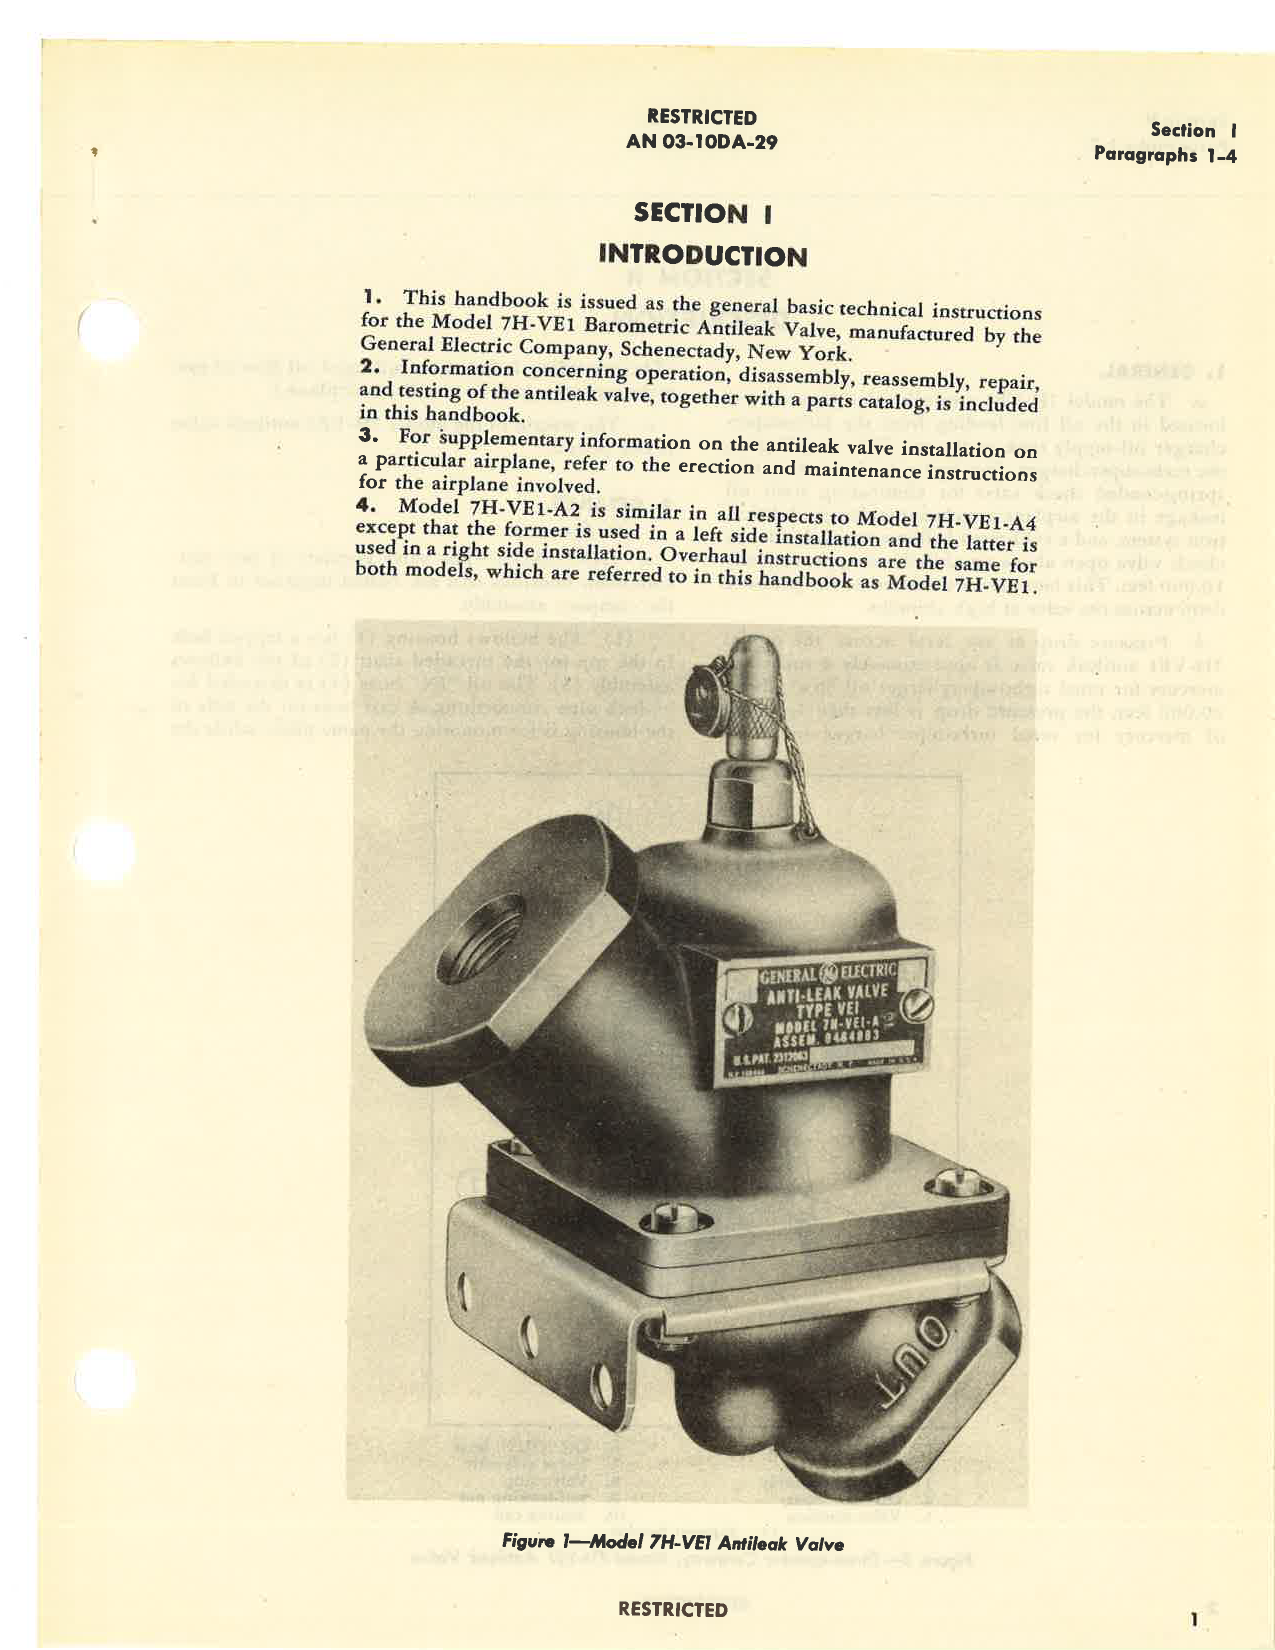 Sample page 5 from AirCorps Library document: Overhaul Instructions with Parts Catalog for Model 7H-VE1 Barometric Antileak Valve